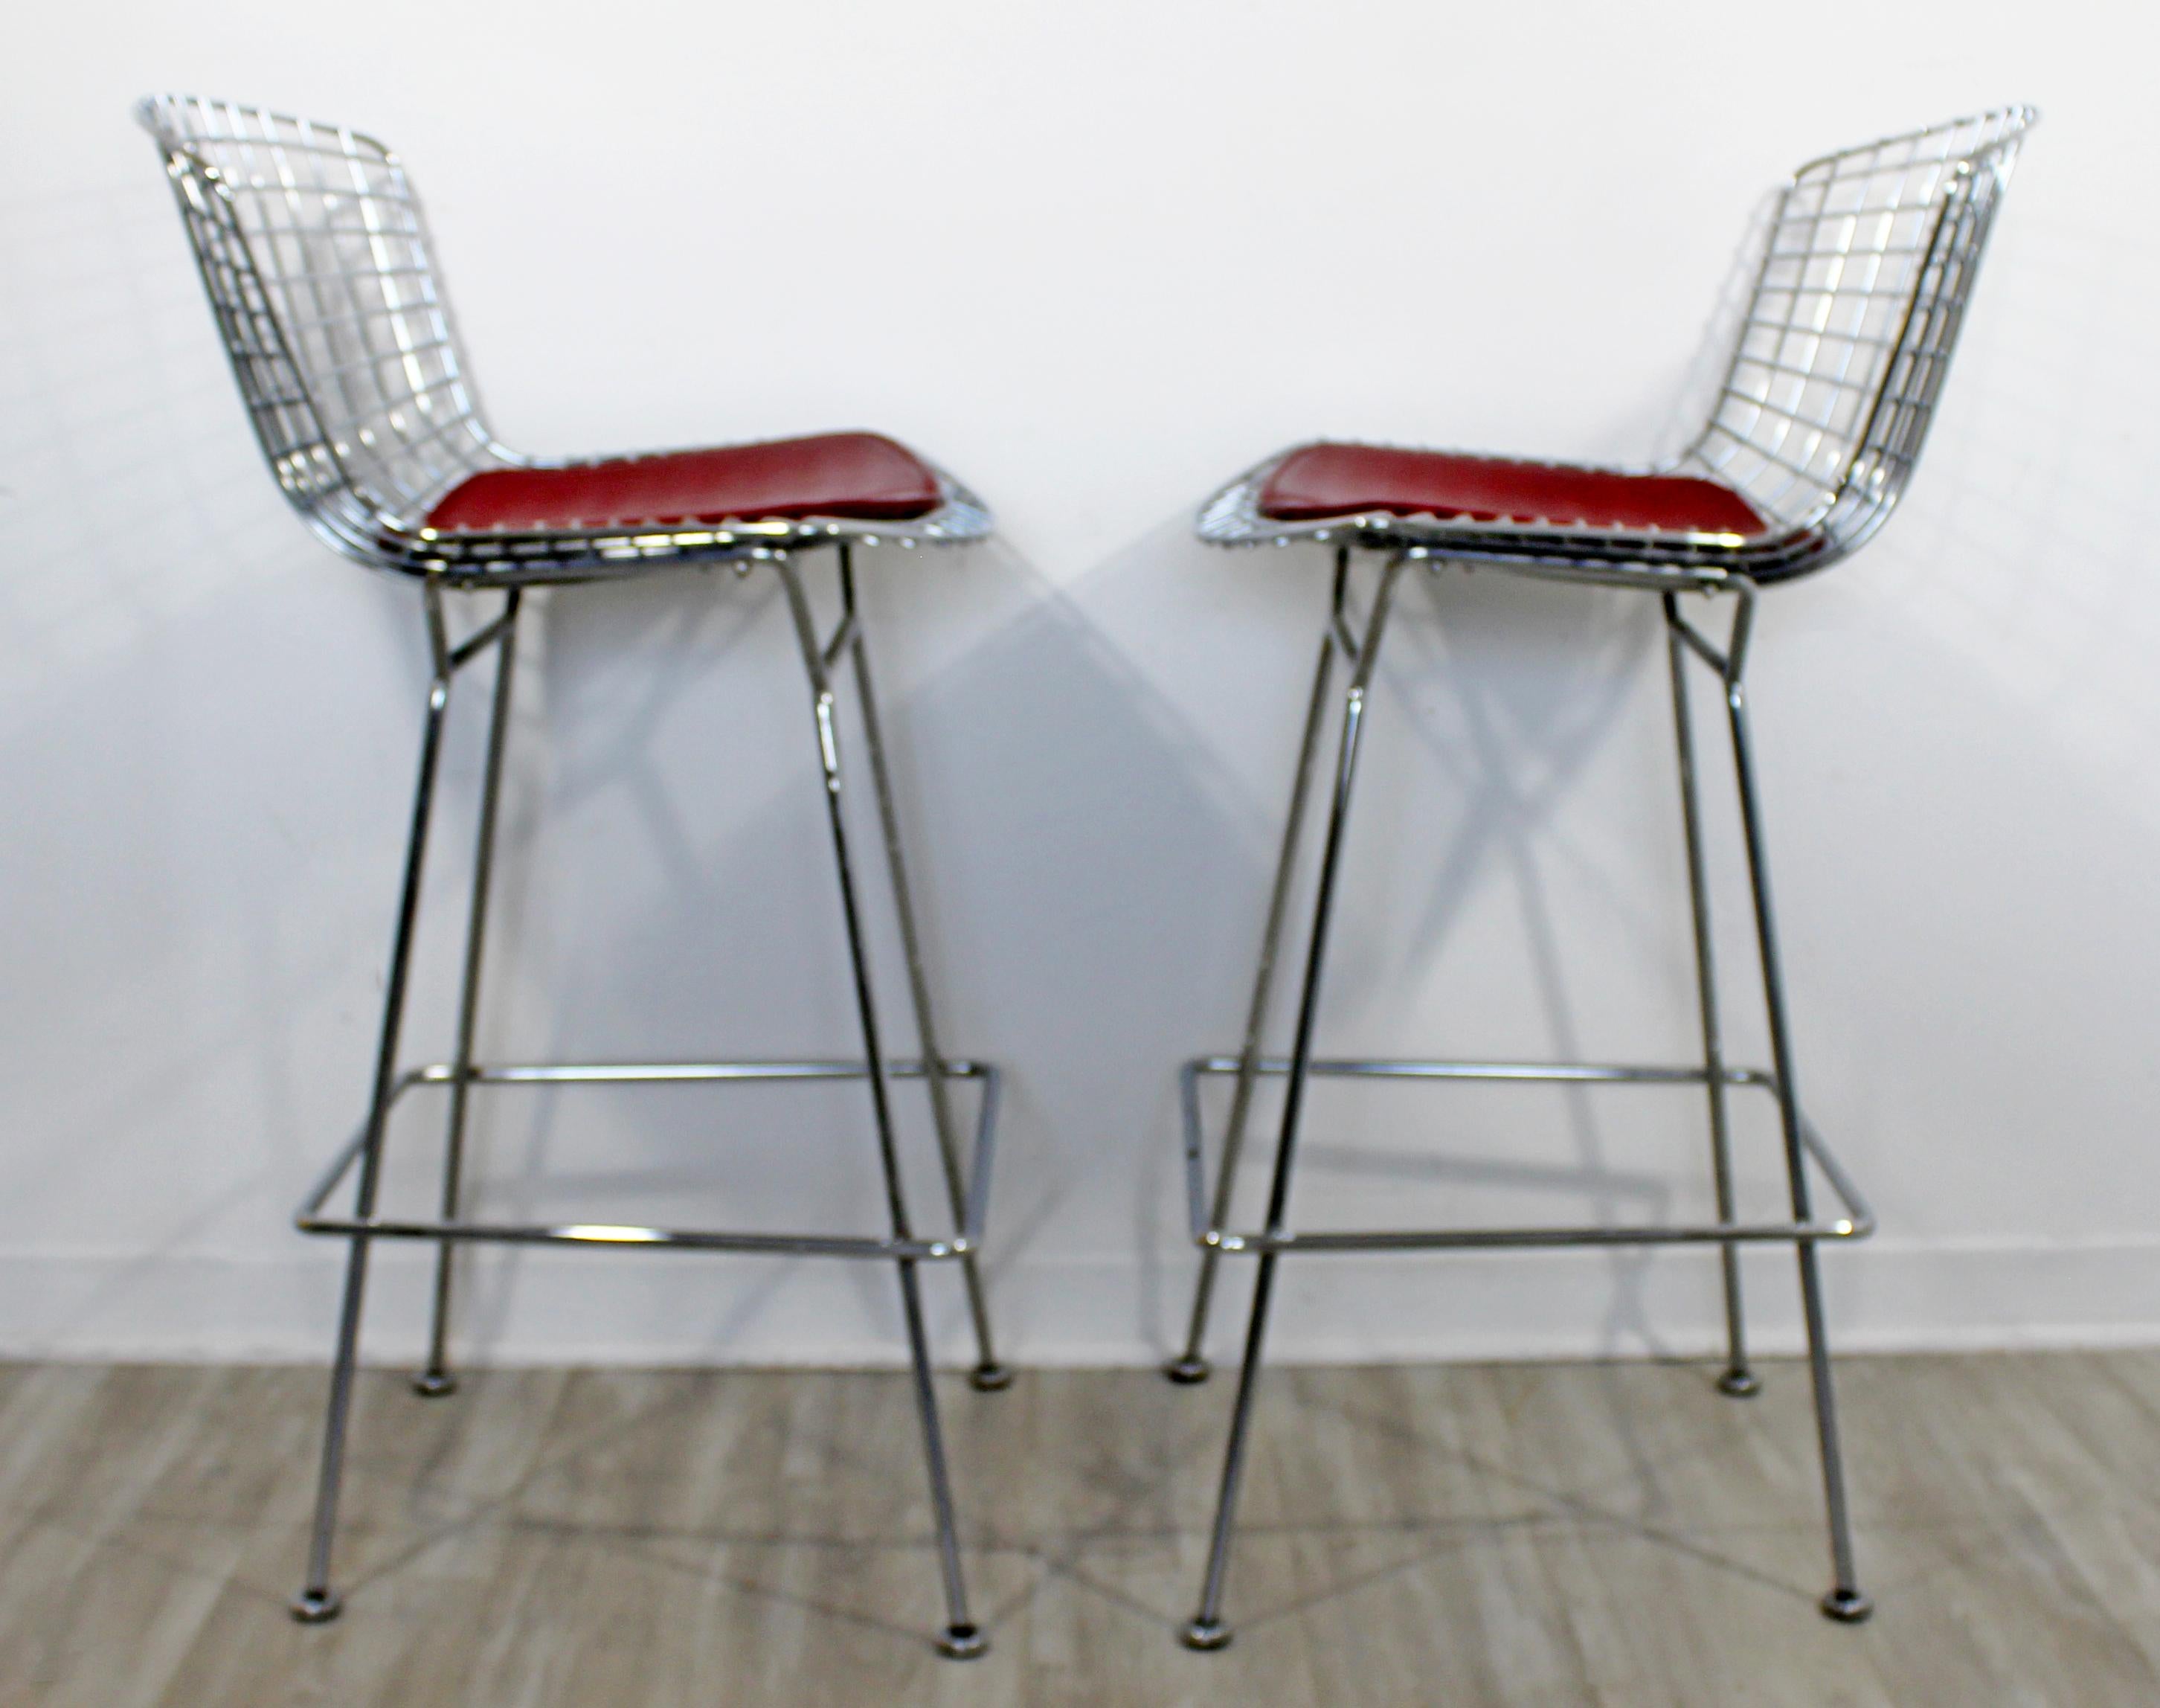 Late 20th Century Mid-Century Modern Authentic Knoll Pair of Chrome Metal Wire Bar Stools, 1970s